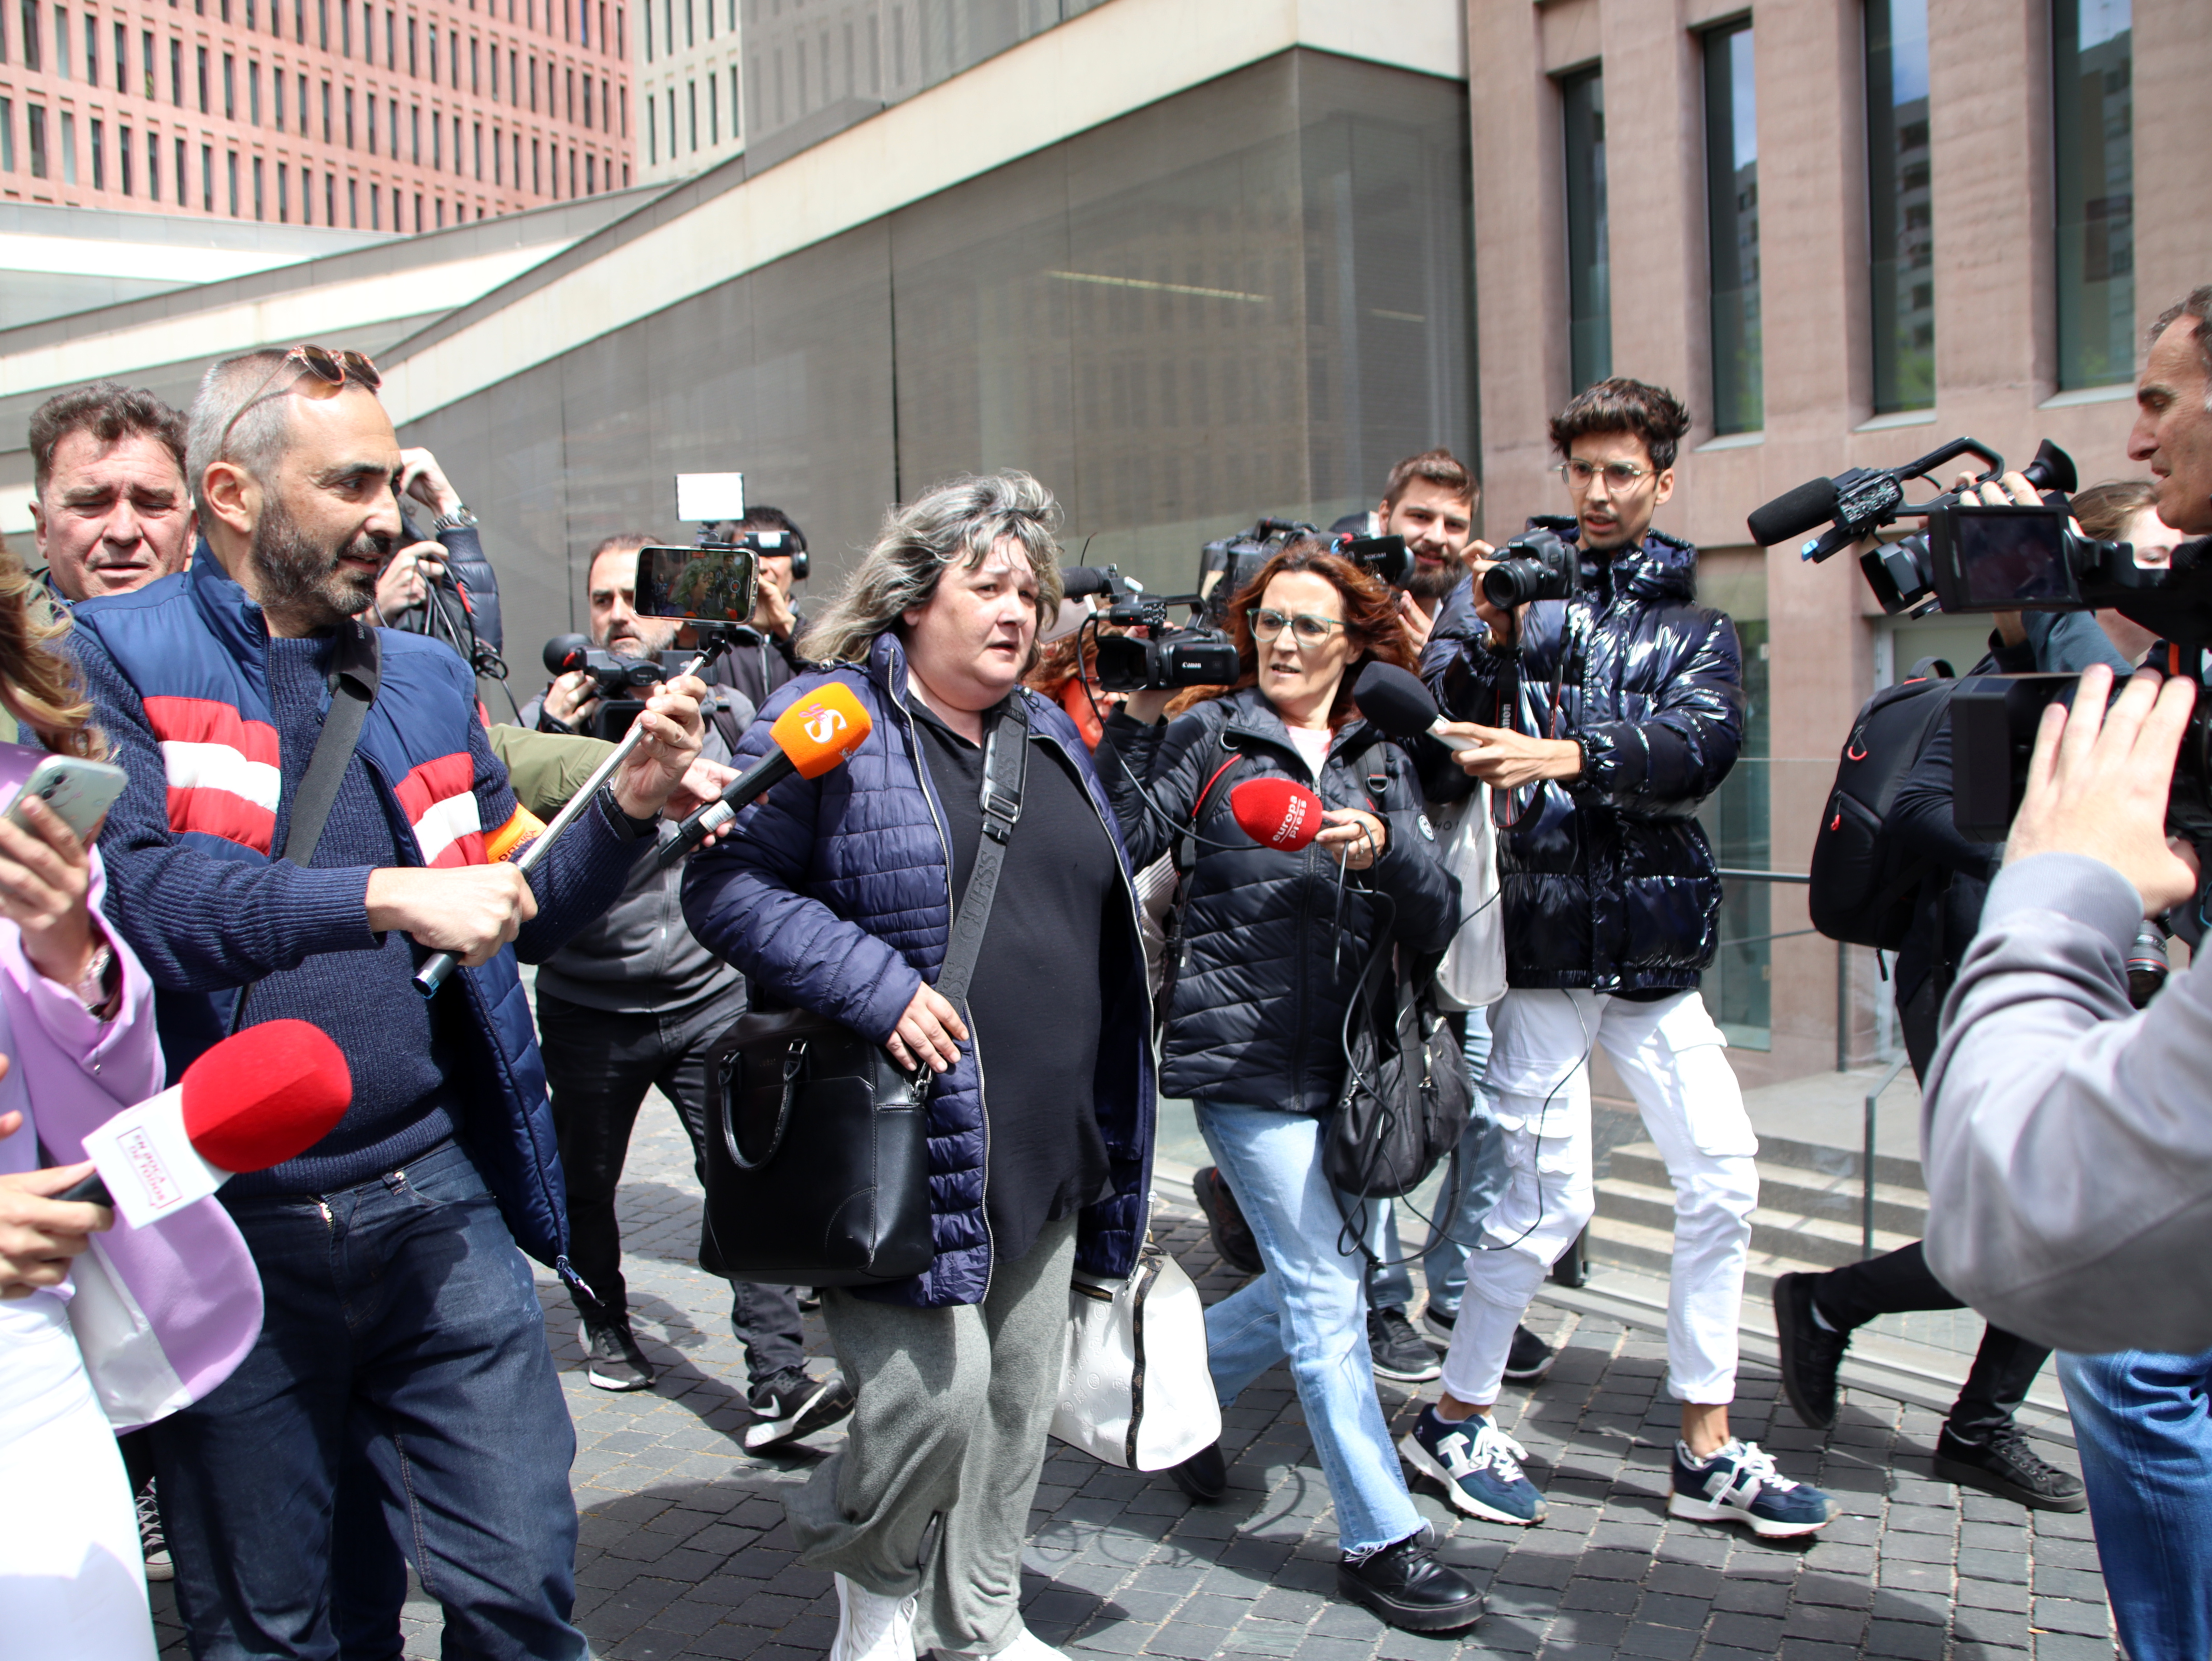 Ester García, the lawyer of Dani Alves' alleged victim in a sexual assault case, surrounded by journalists at the Ciutat de la Justícia courthouse on April 17, 2023